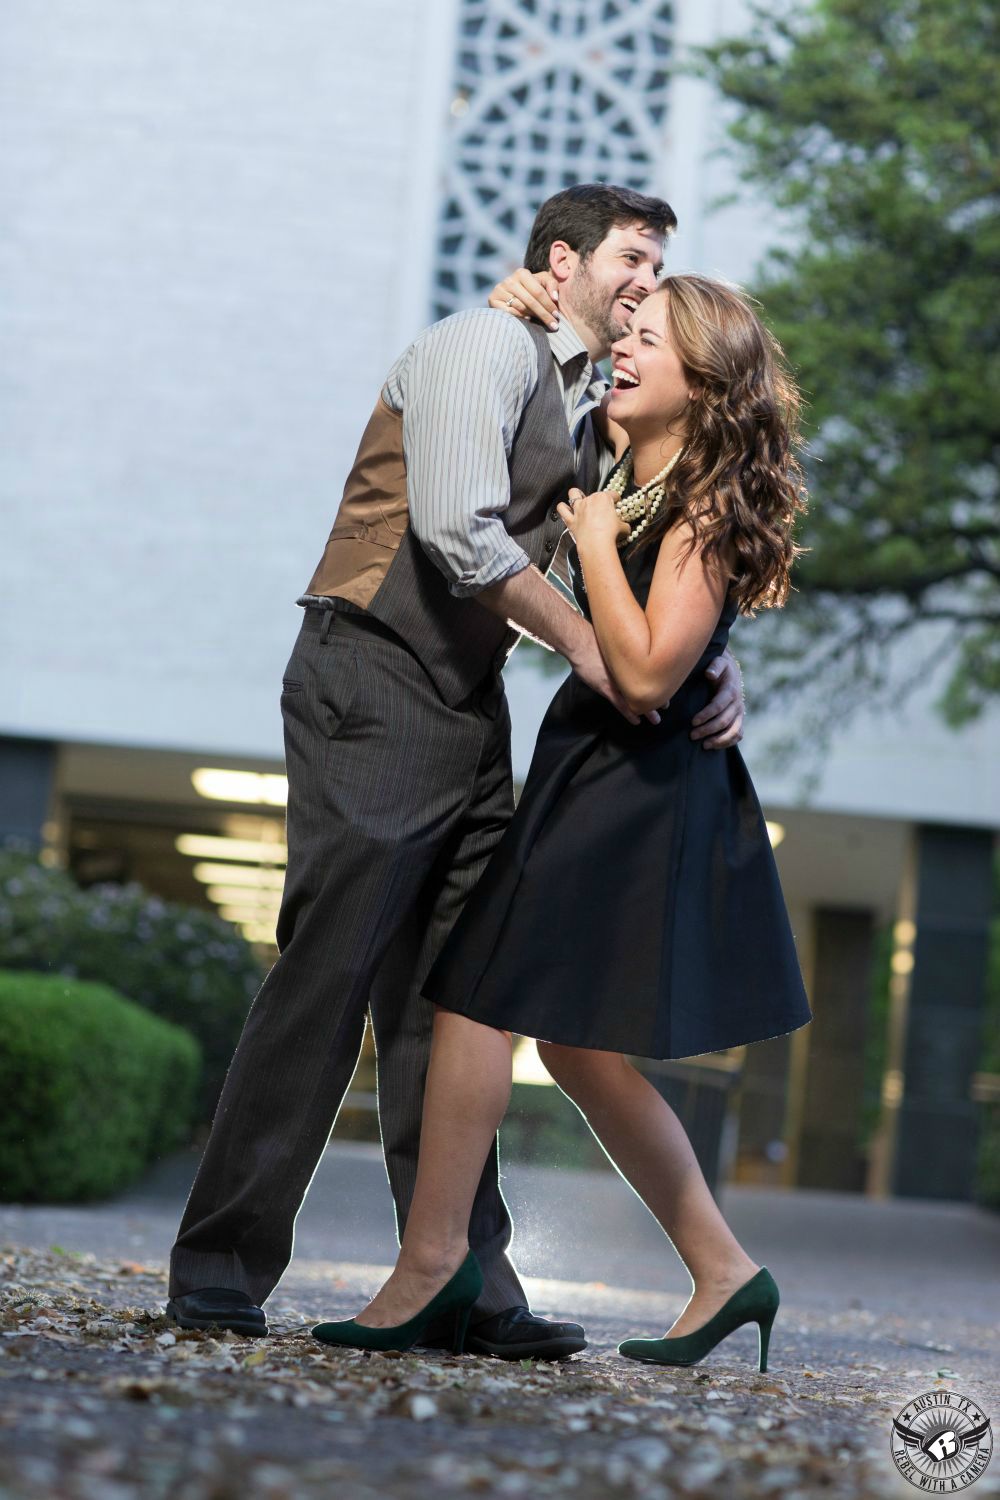 Brunette girl with an infectious laugh wearing black knee length dress, white pears and black heals holds a a guy with dark hair wearing a grey and black striped shirt, a tan and grey vest and grey striped pants in front of the library at UT in this sensational retro engagement image in Austin, Texas.